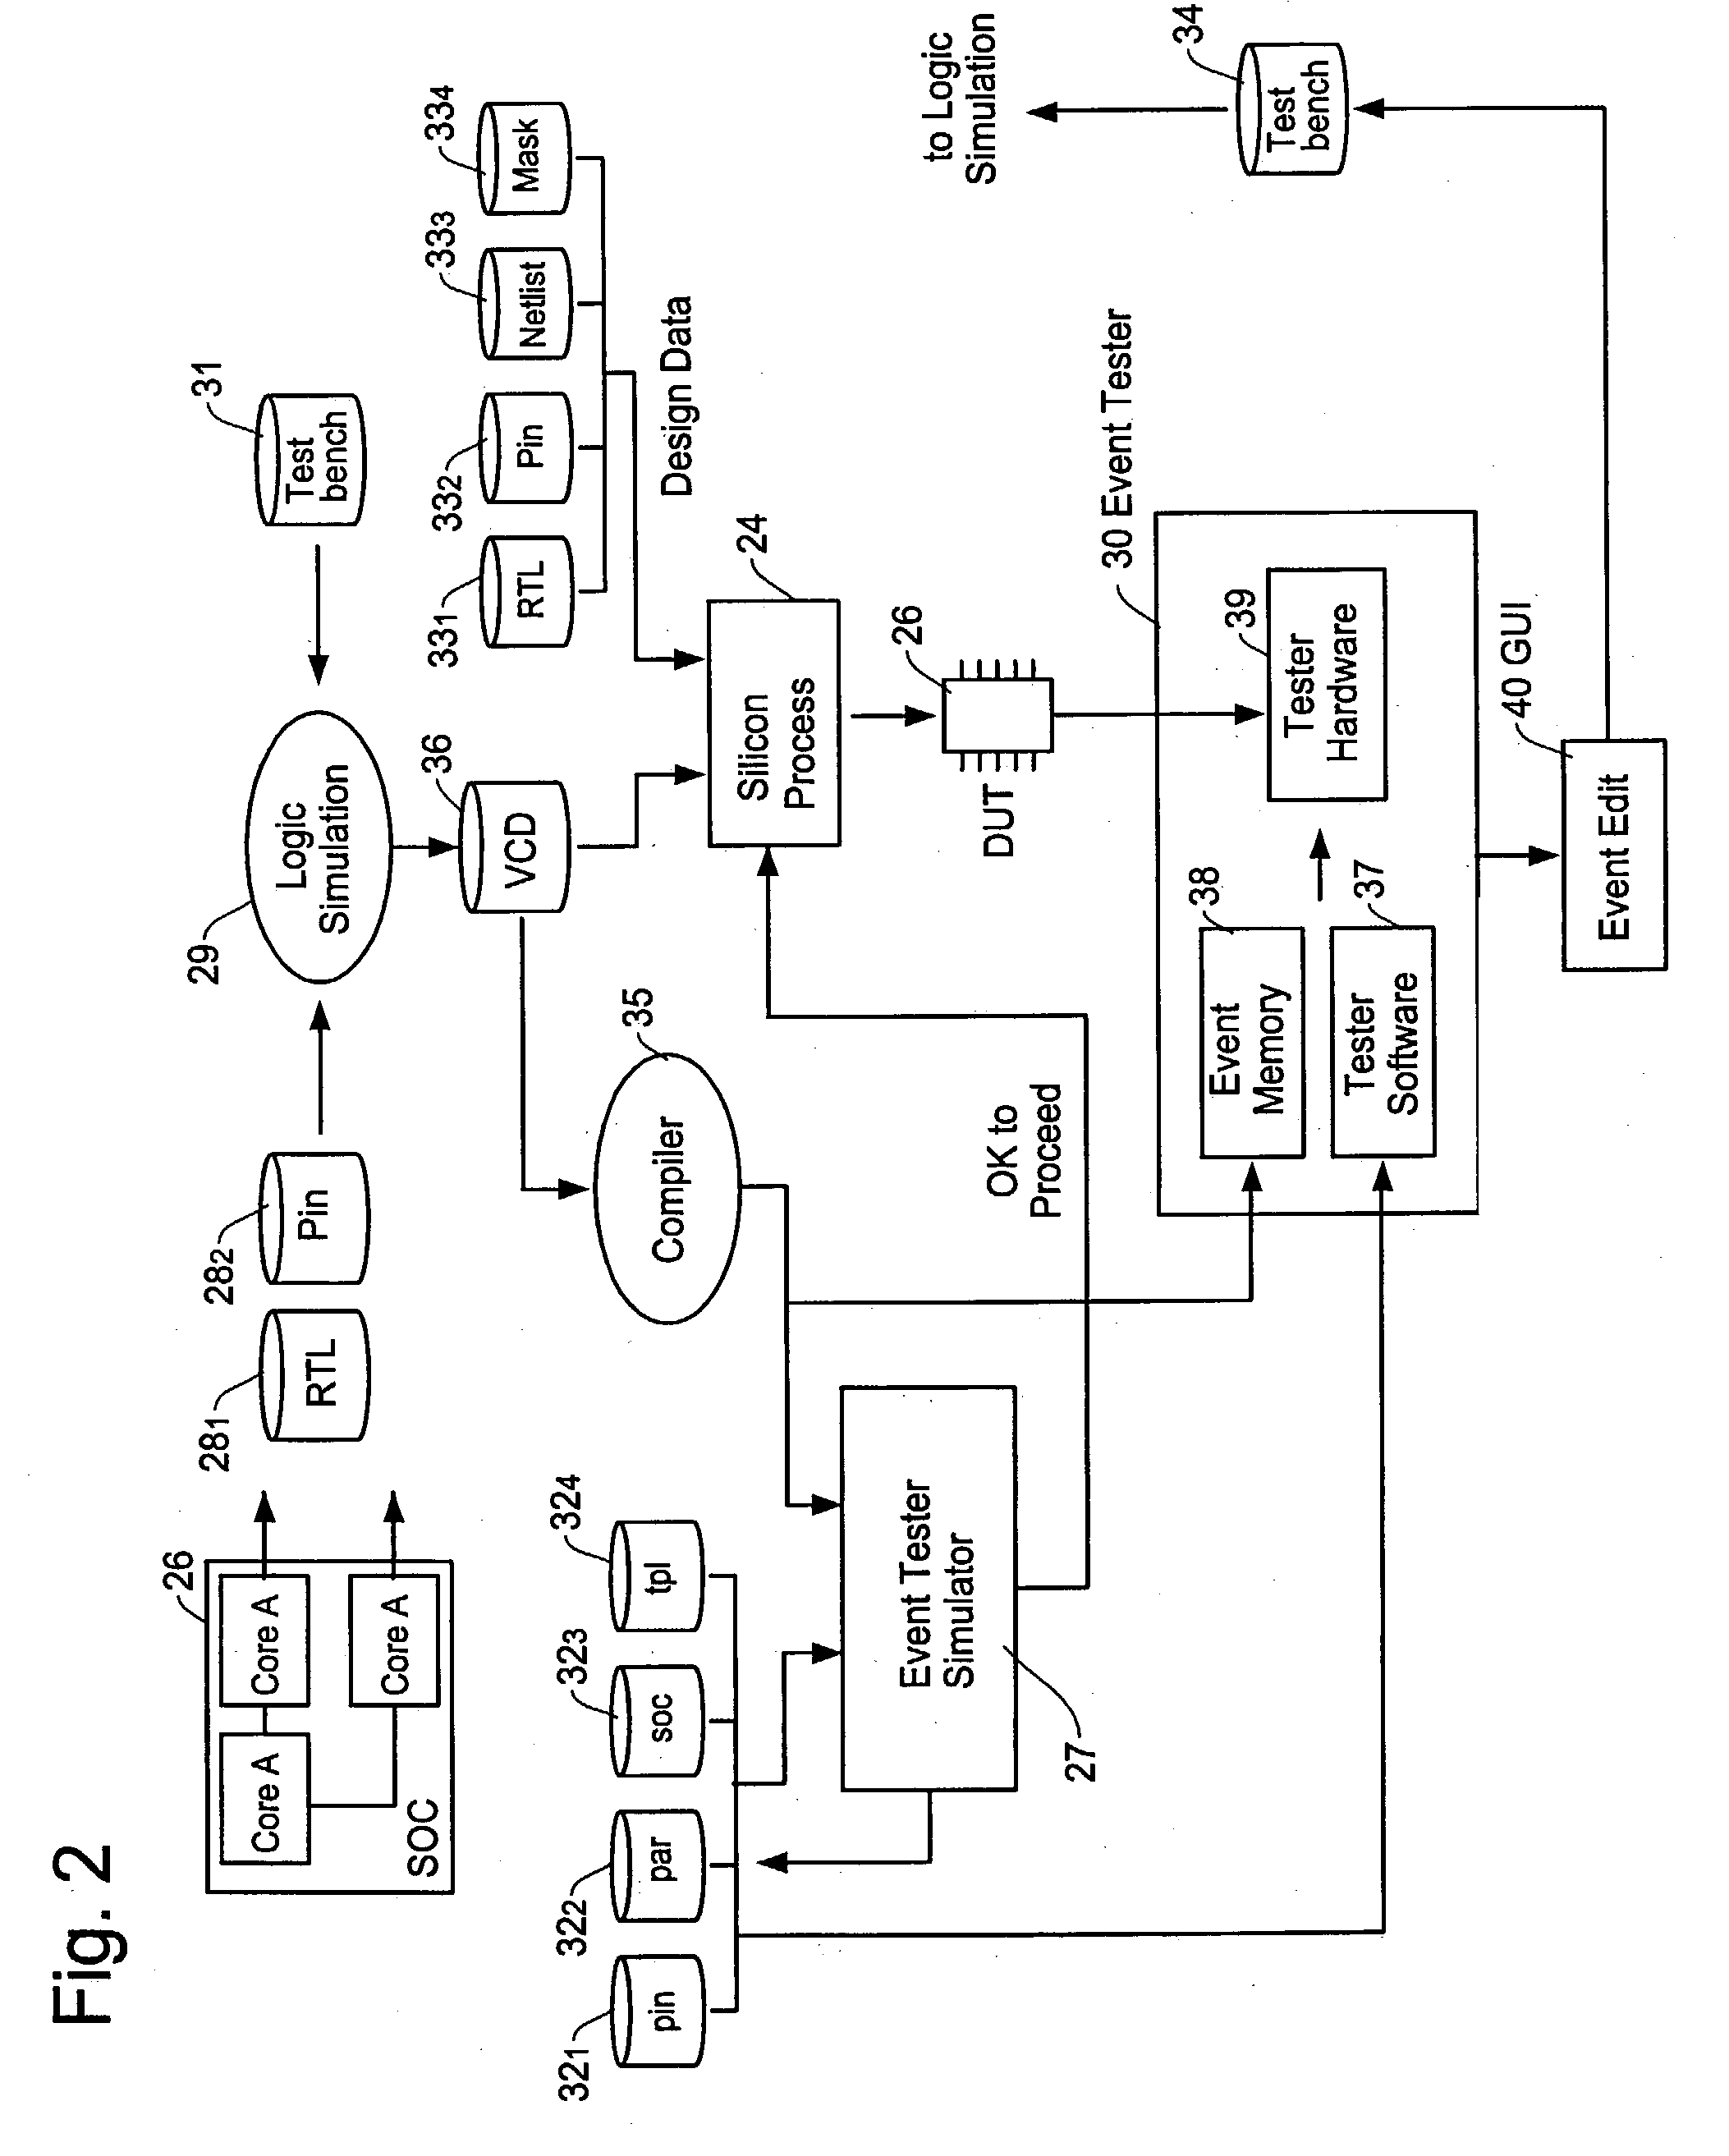 Manufacturing method and apparatus to avoid prototype-hold in ASIC/SOC manufacturing